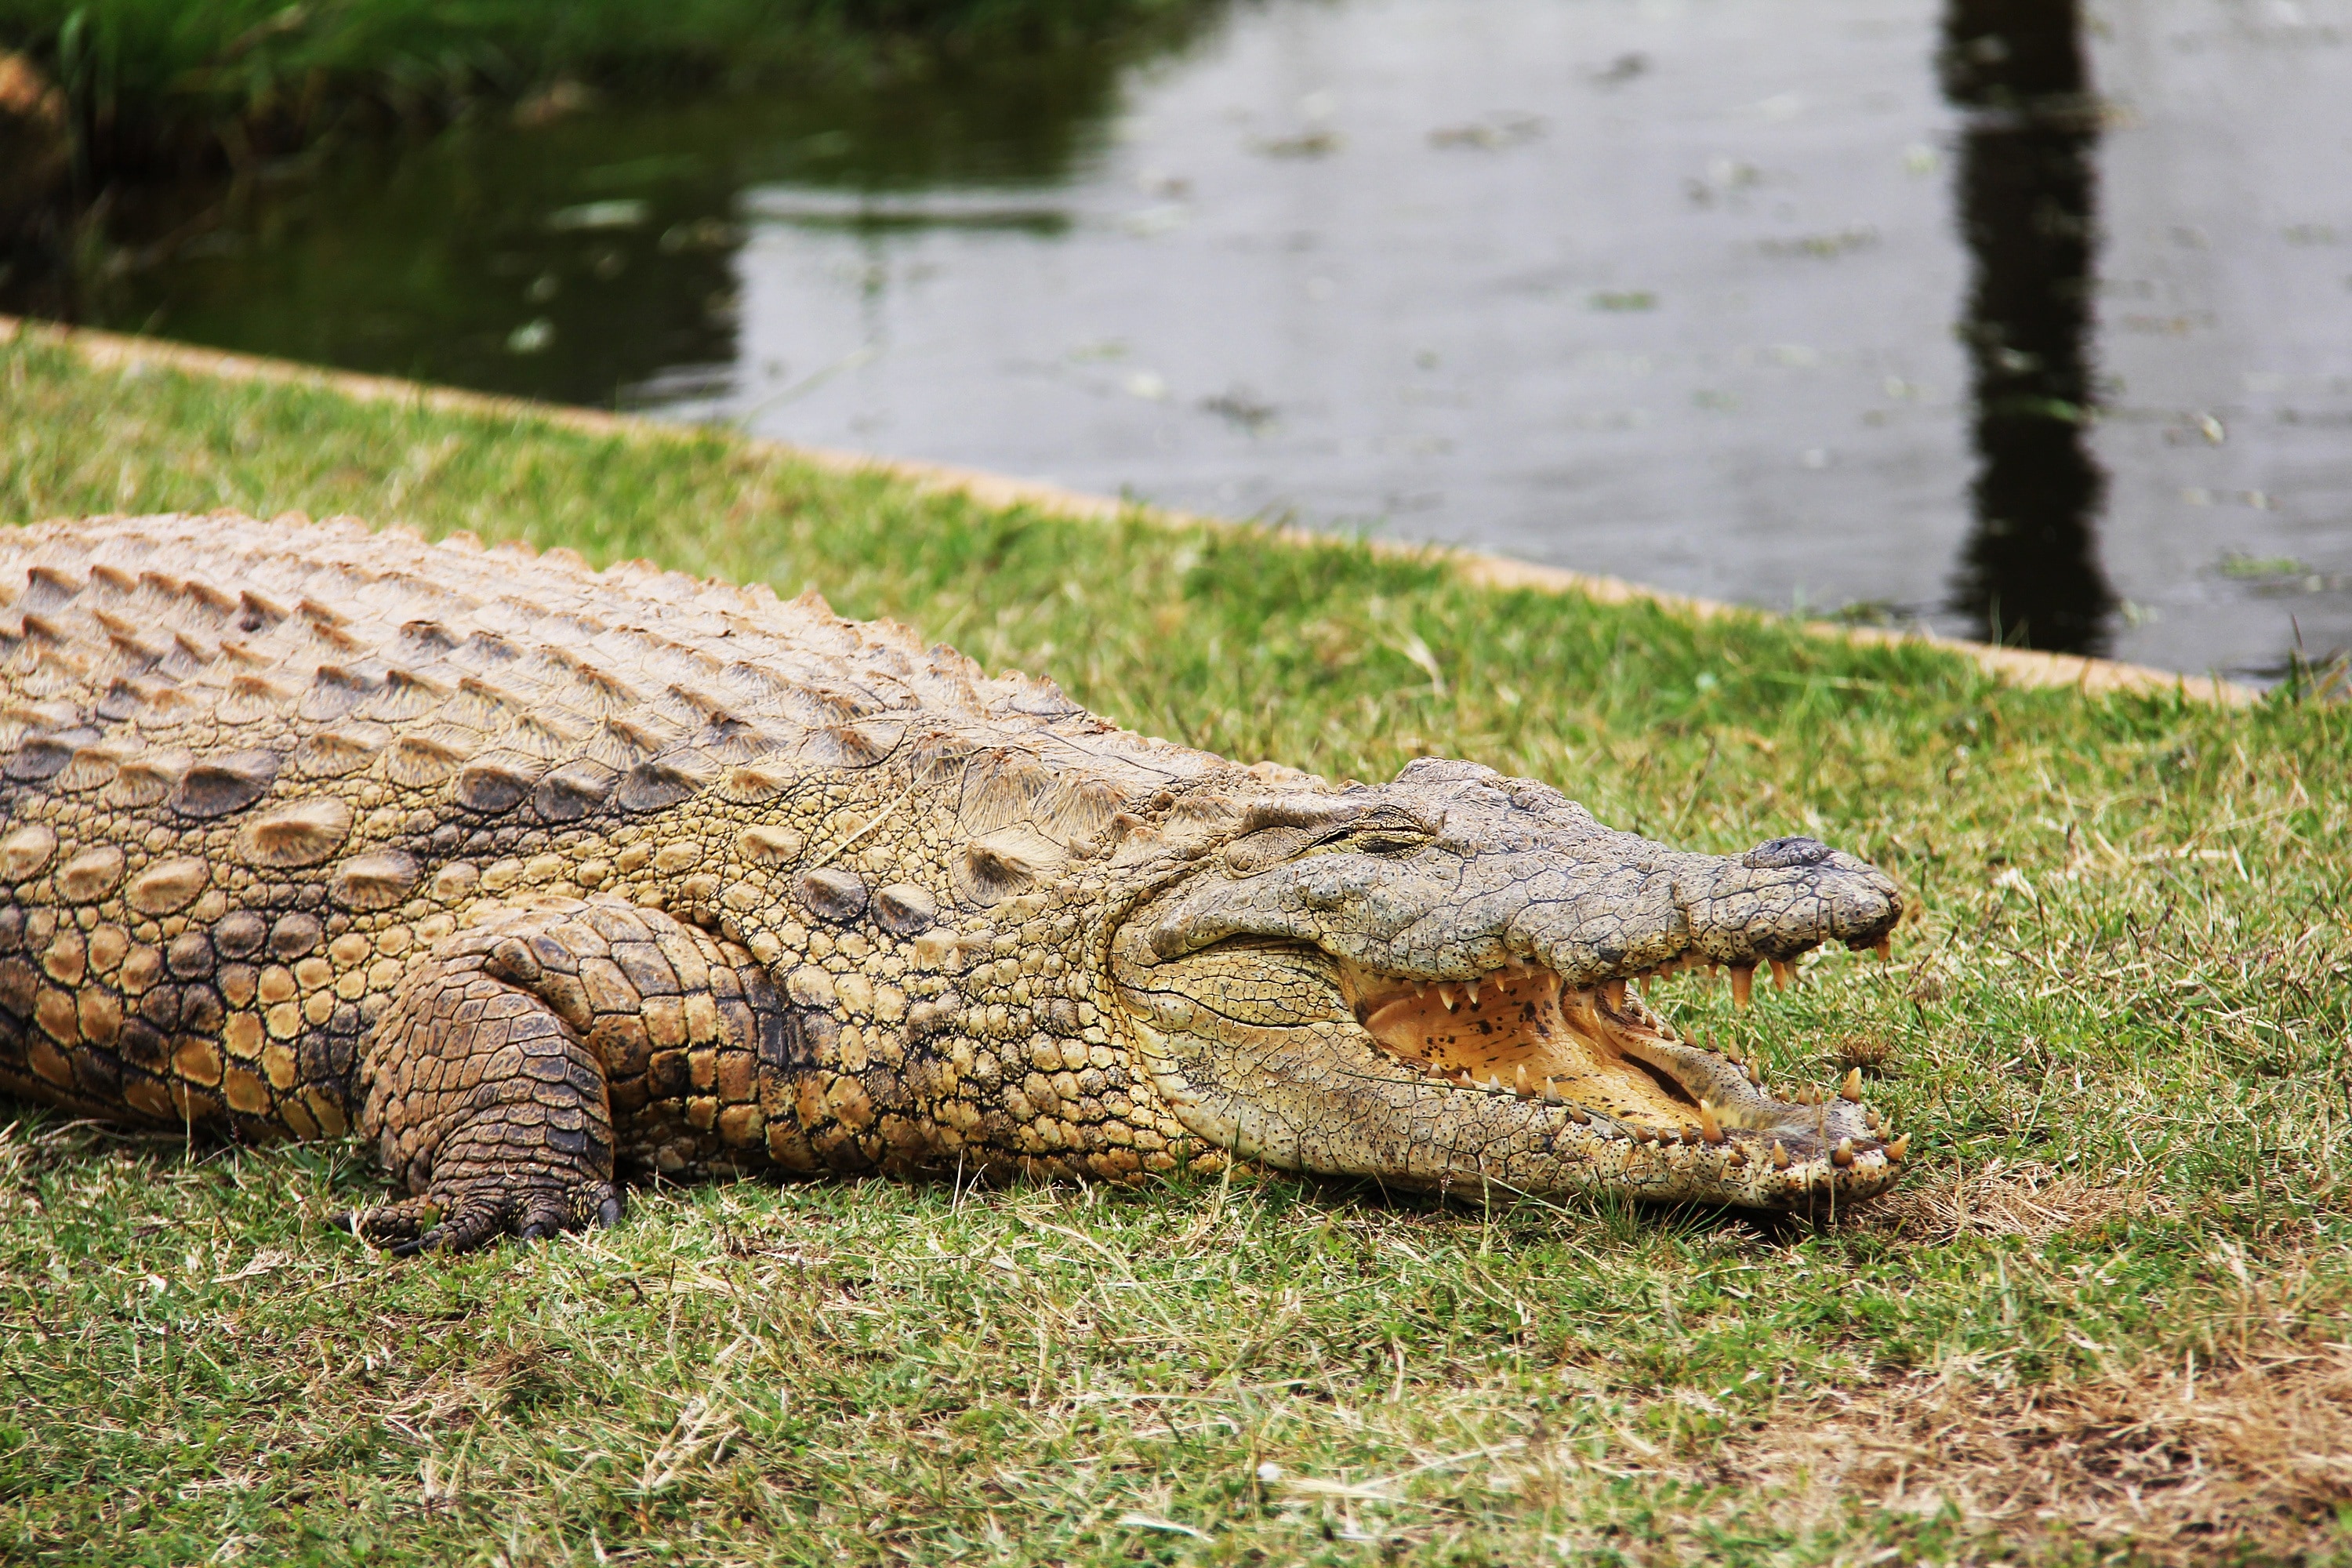 crocodile near body of water during daytime